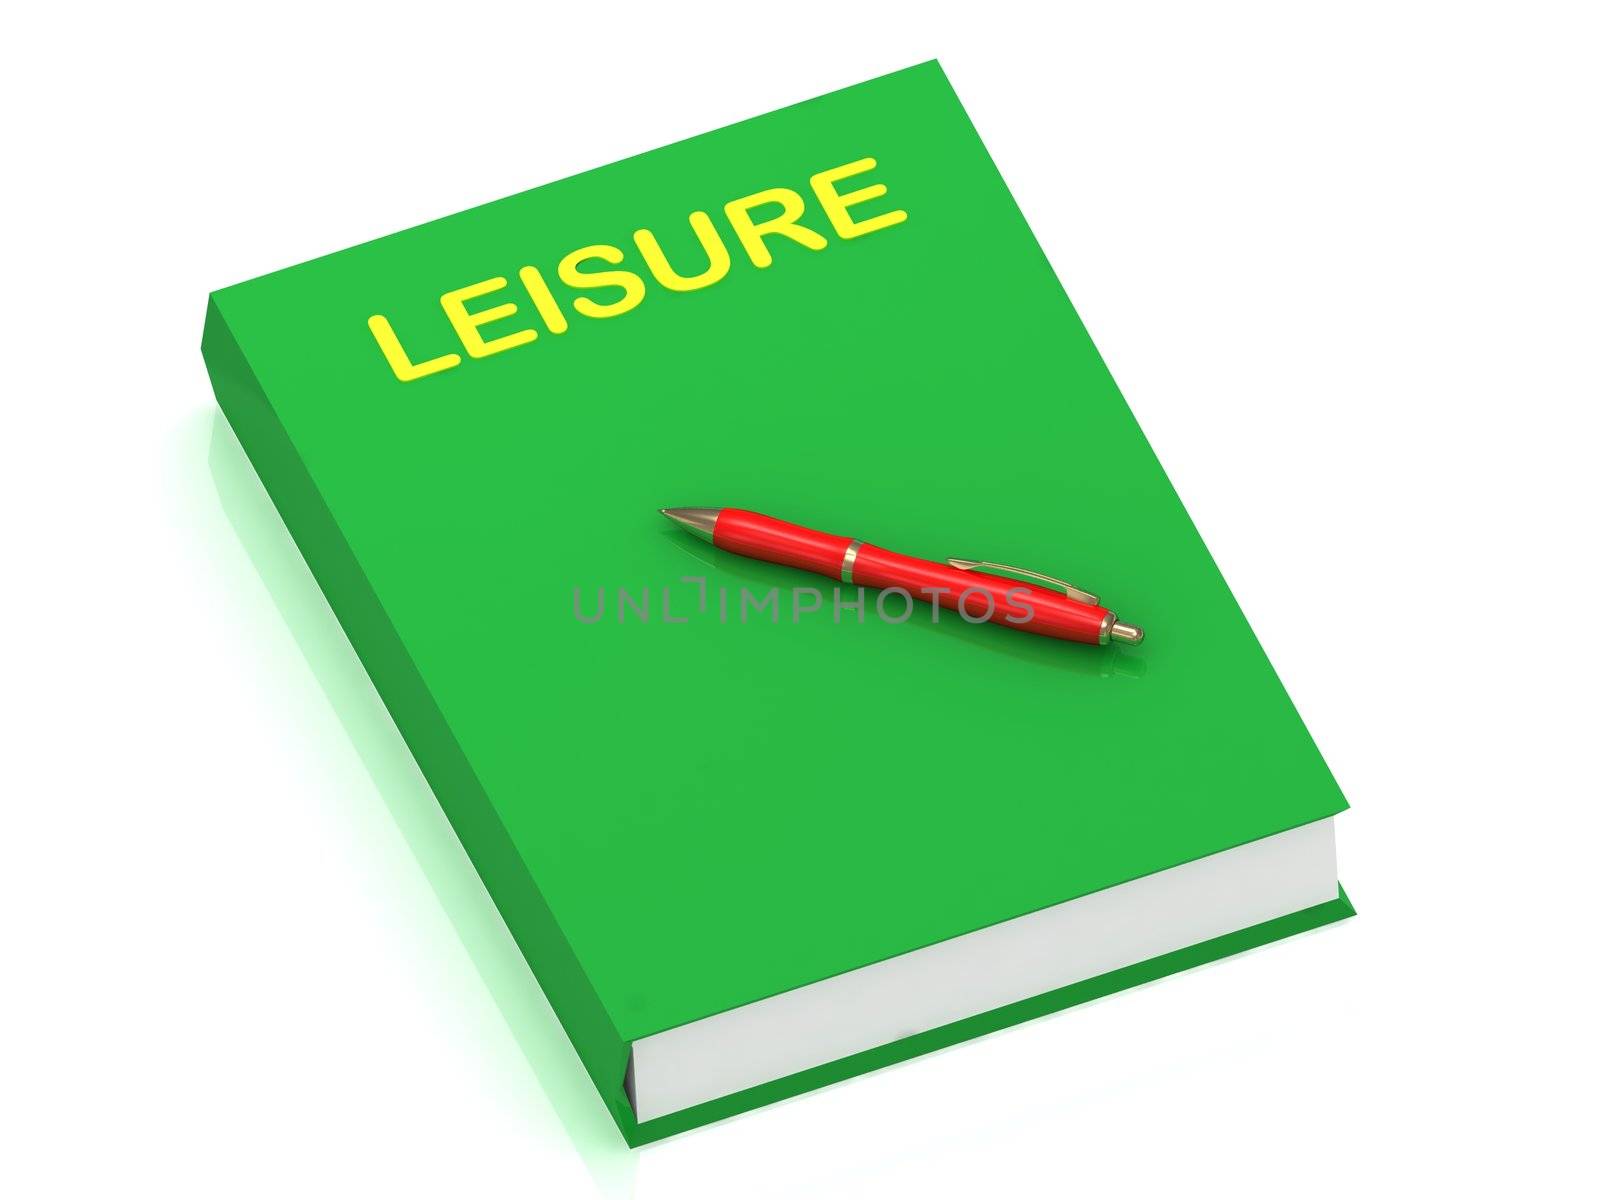 LEISURE name on cover book by GreenMost